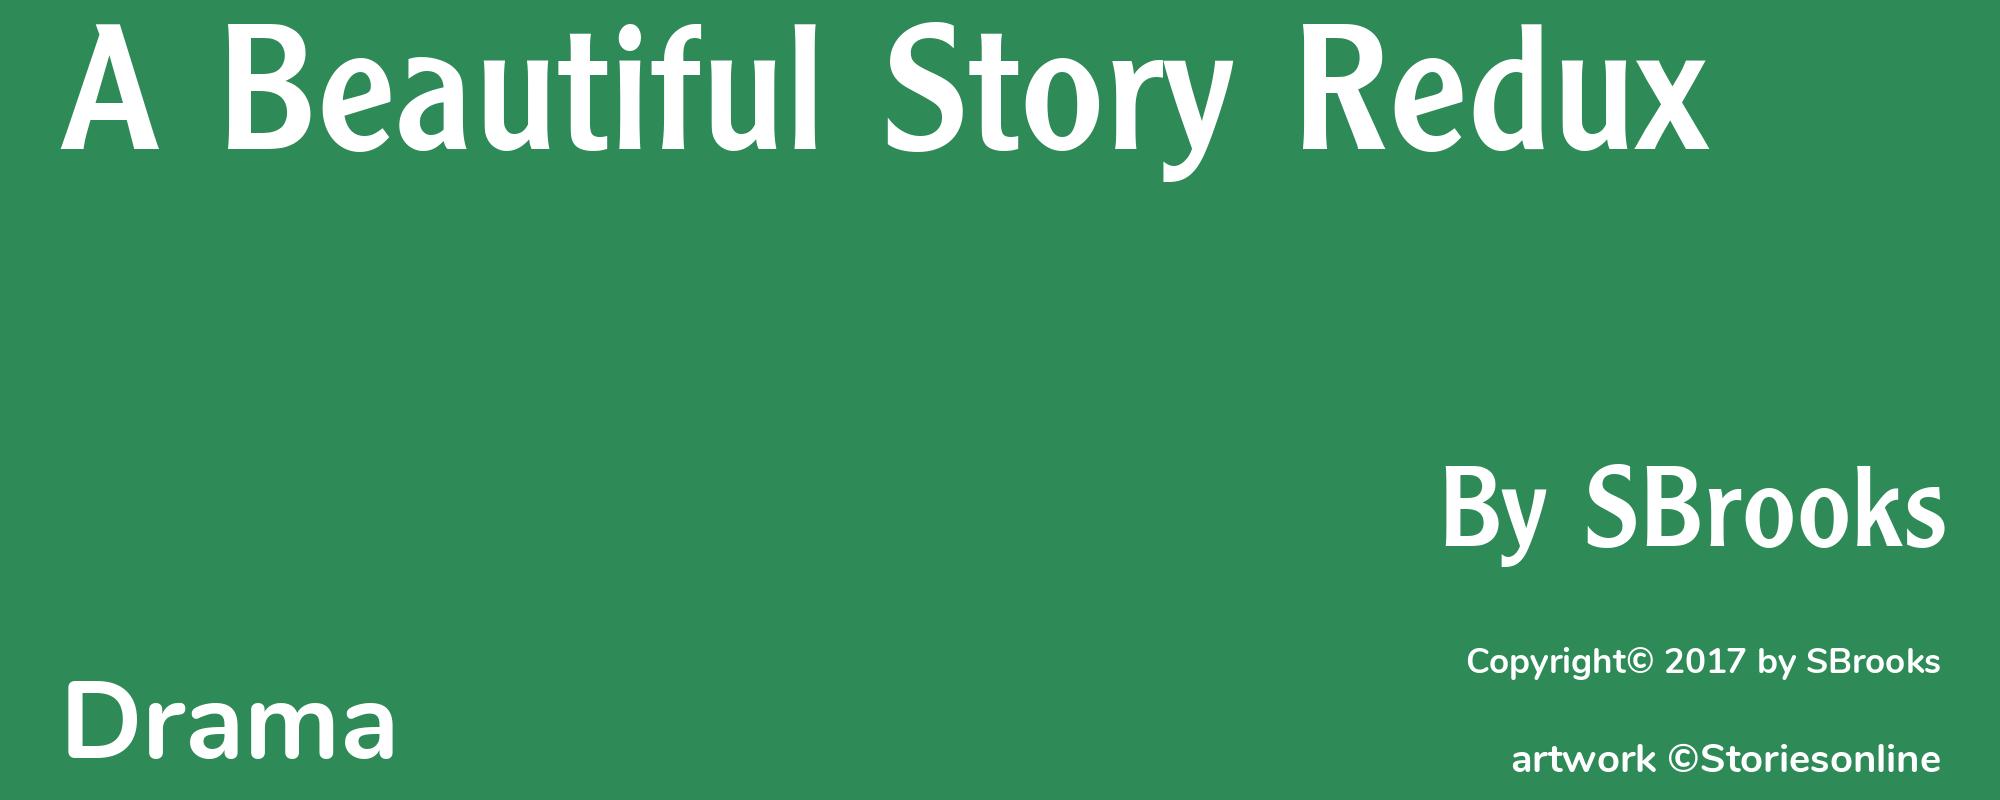 A Beautiful Story Redux - Cover